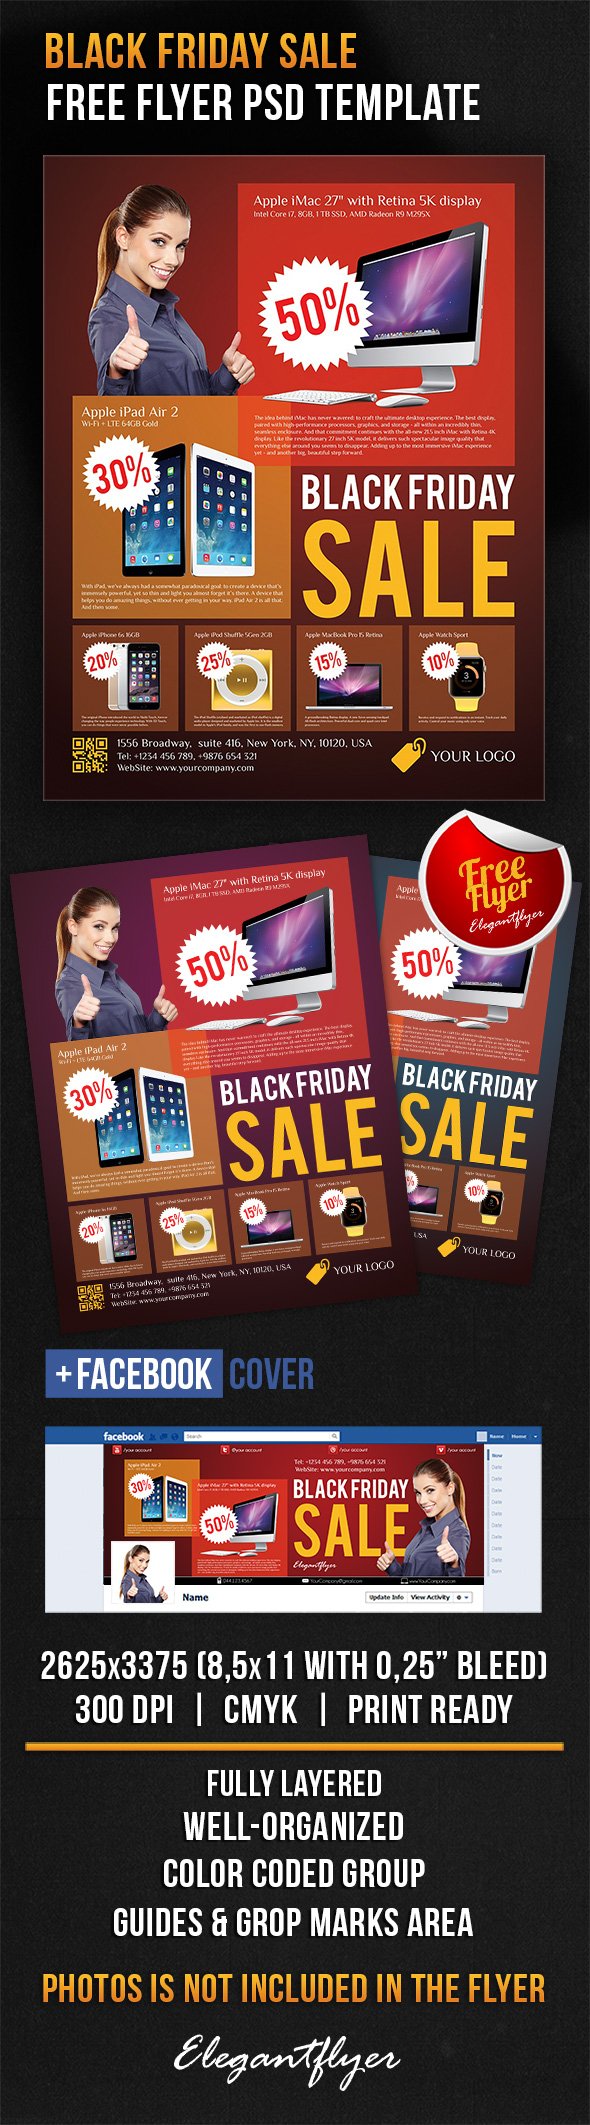 Black Friday Sale Flyer Template Free